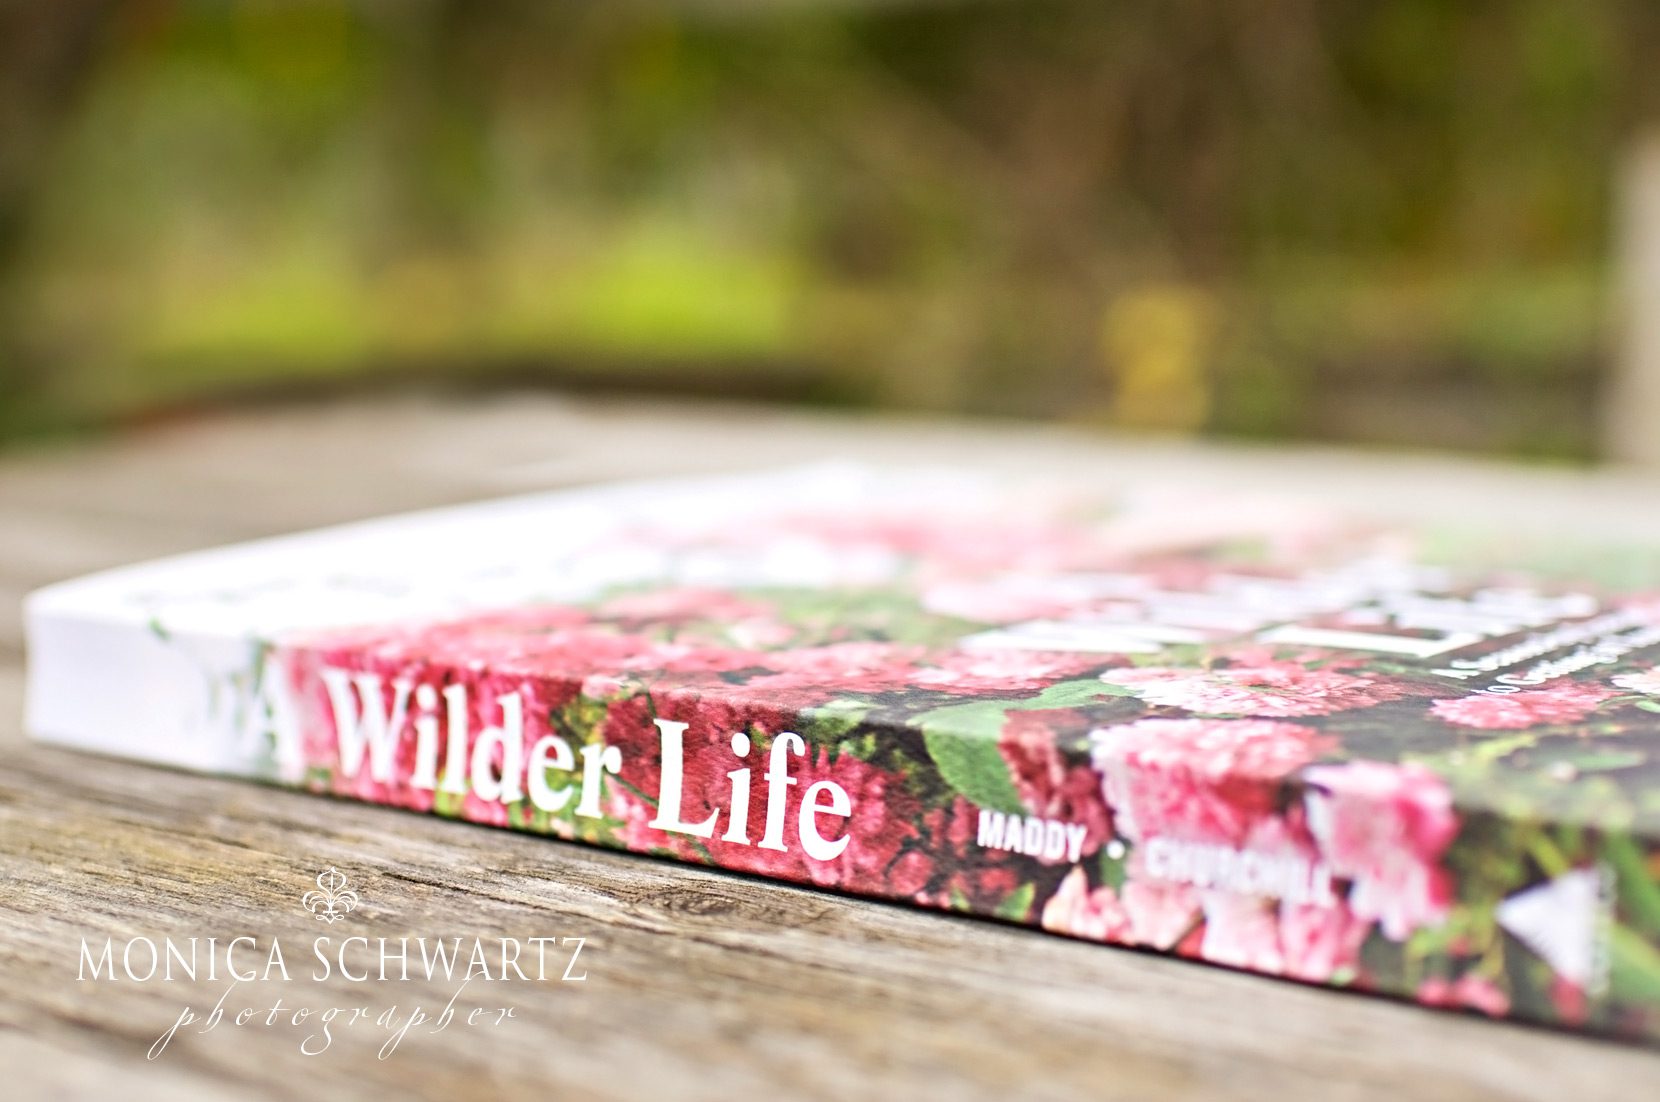 Book-A-Wilder-Life-by-Celestine-Maddy-with-Abbye-Churchill